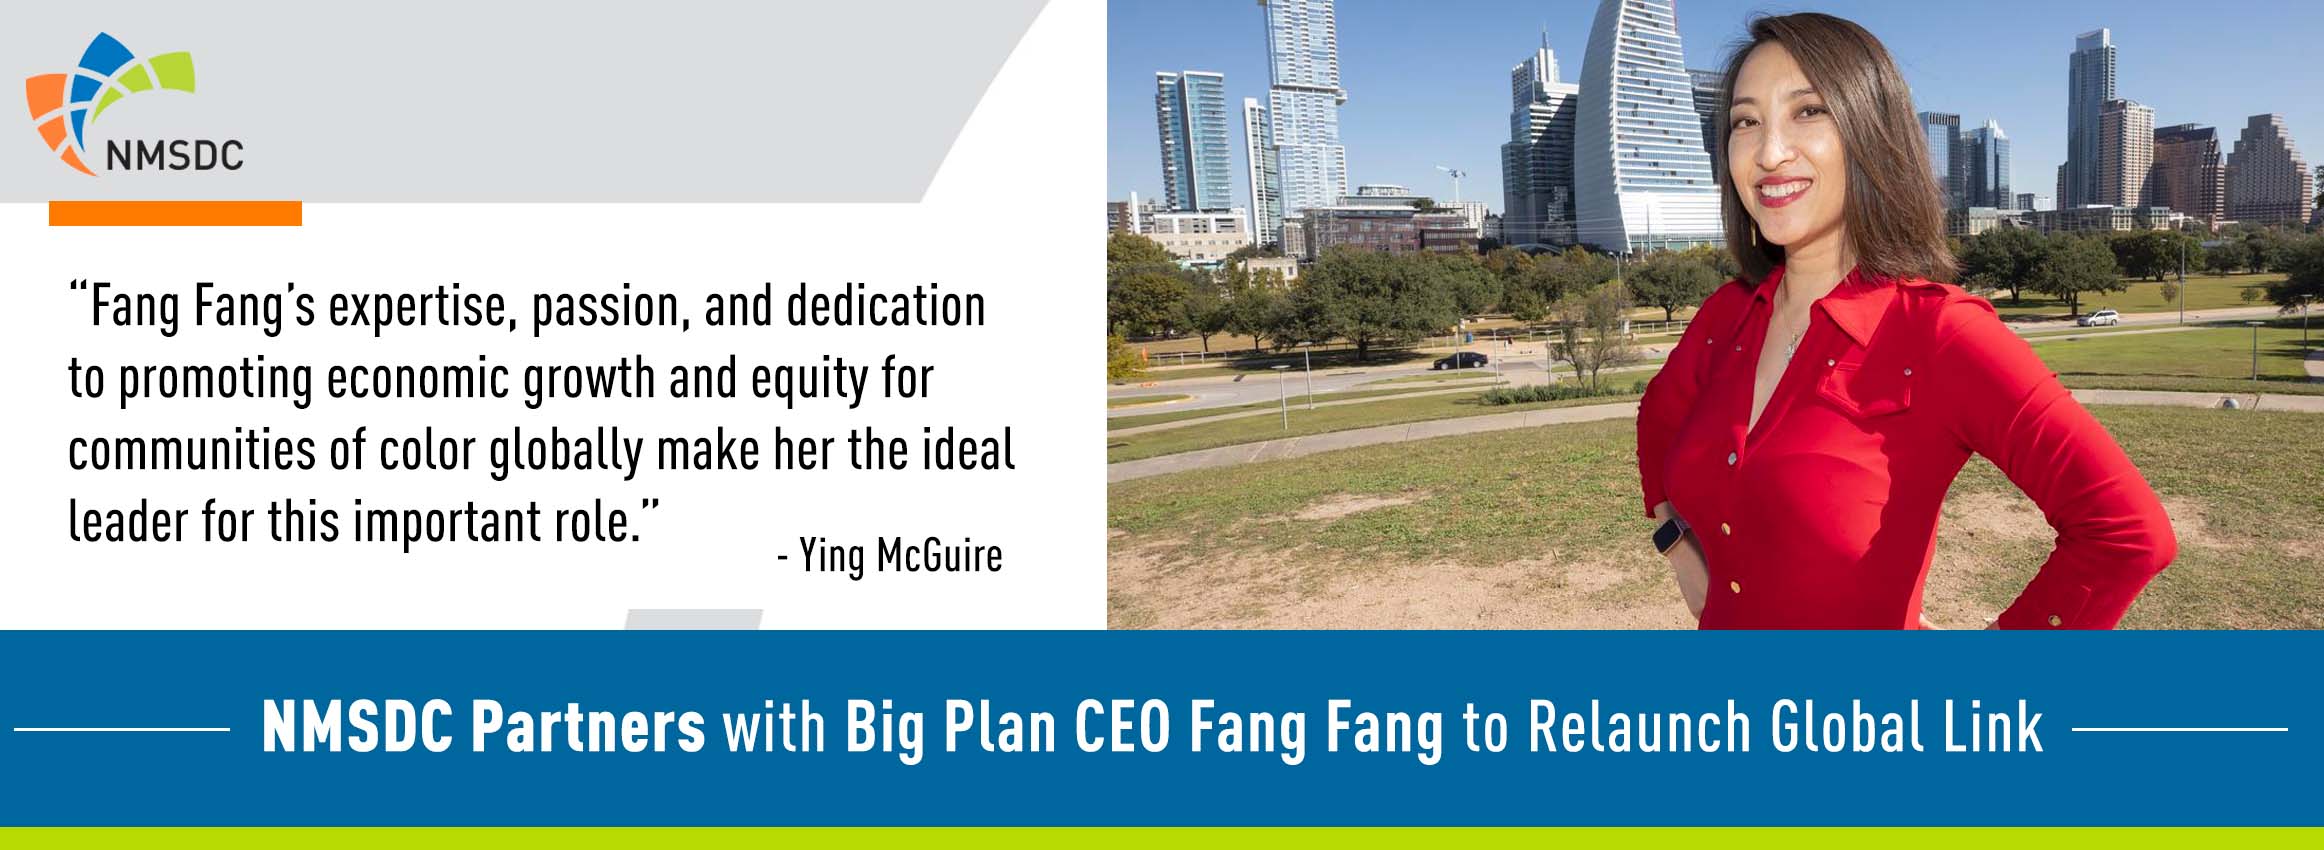 NMSDC Partners with Big Plan CEO Fang Fang to Relaunch Global Link